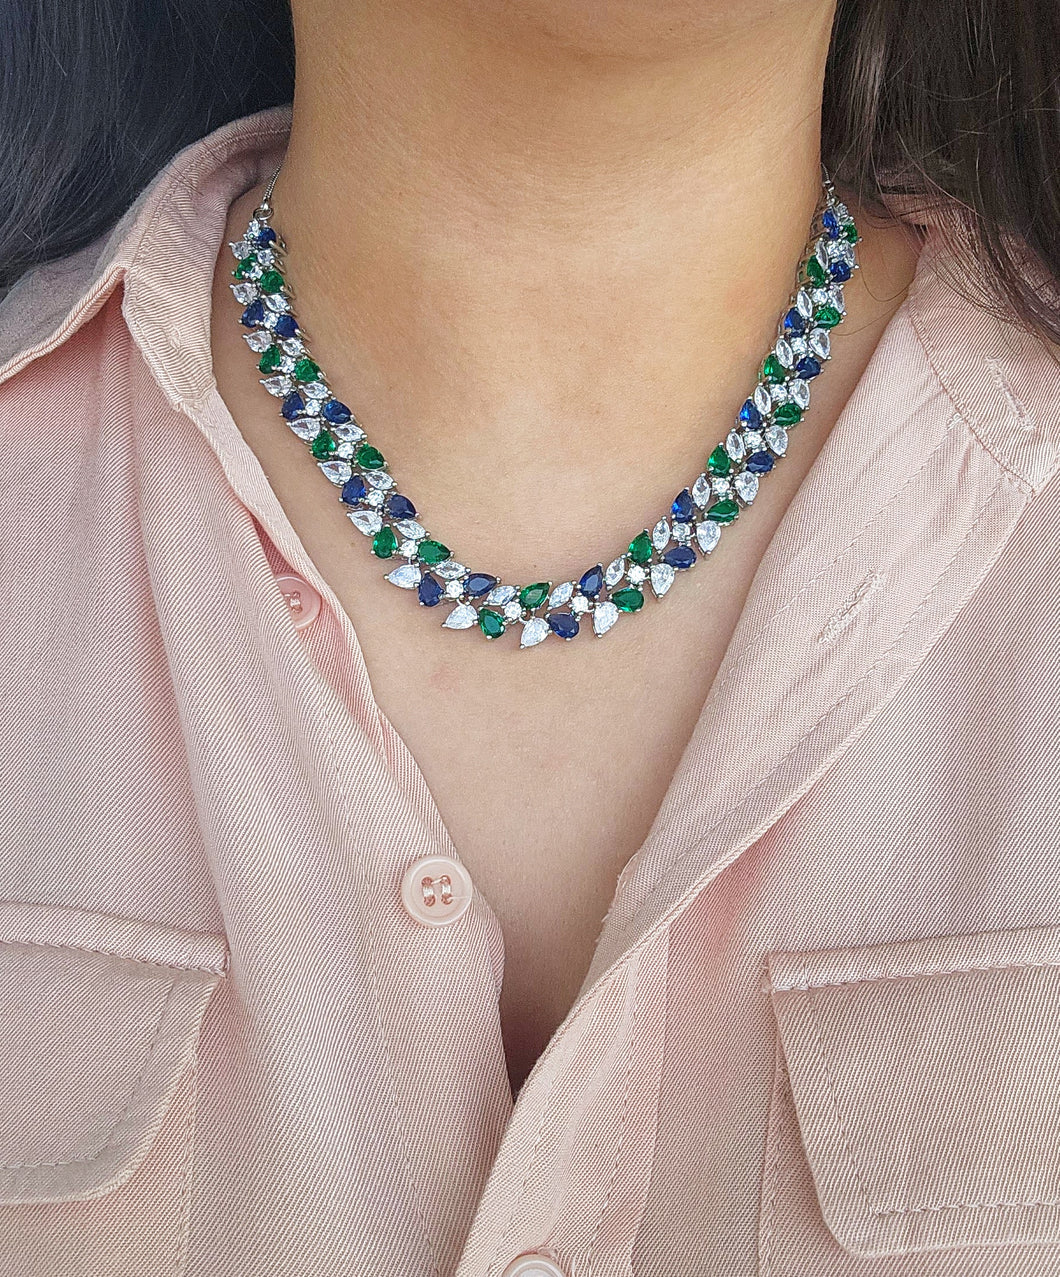 Emerald and blue sapphire necklace